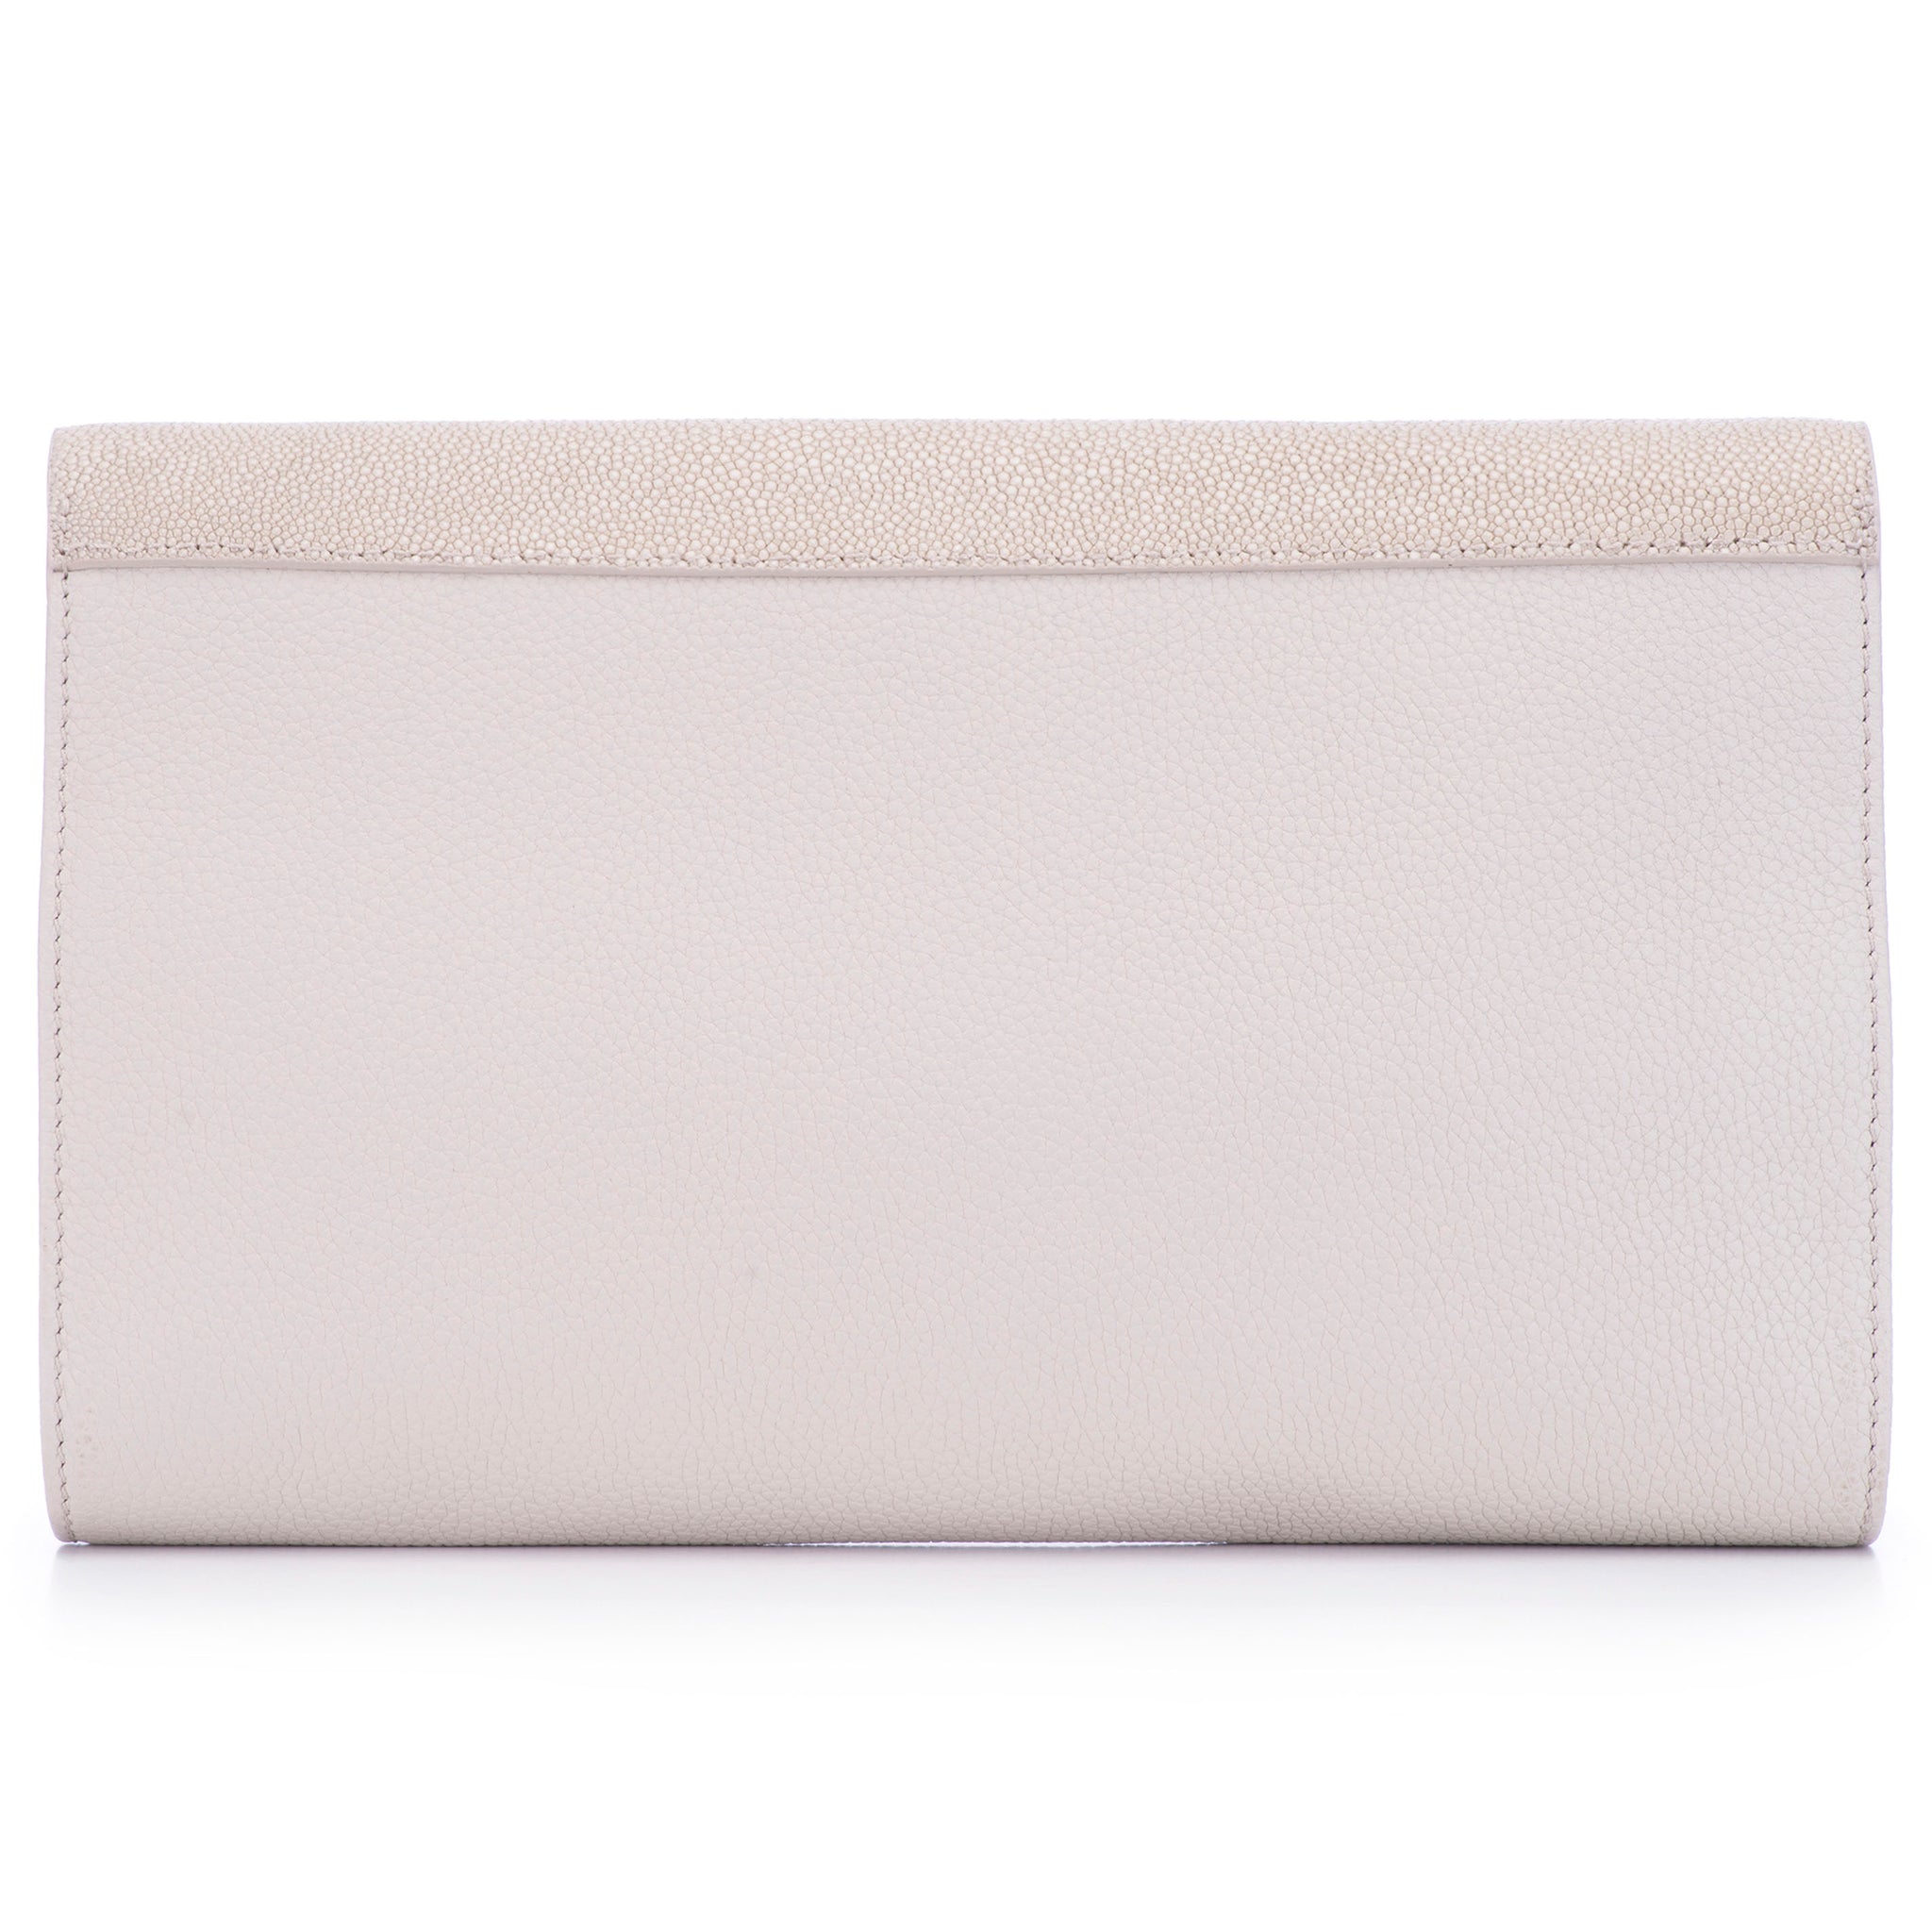 Cement Shagreen Ecru Leather Body Detachable Chain Holly Oversize Clutch Back View - Vivo Direct